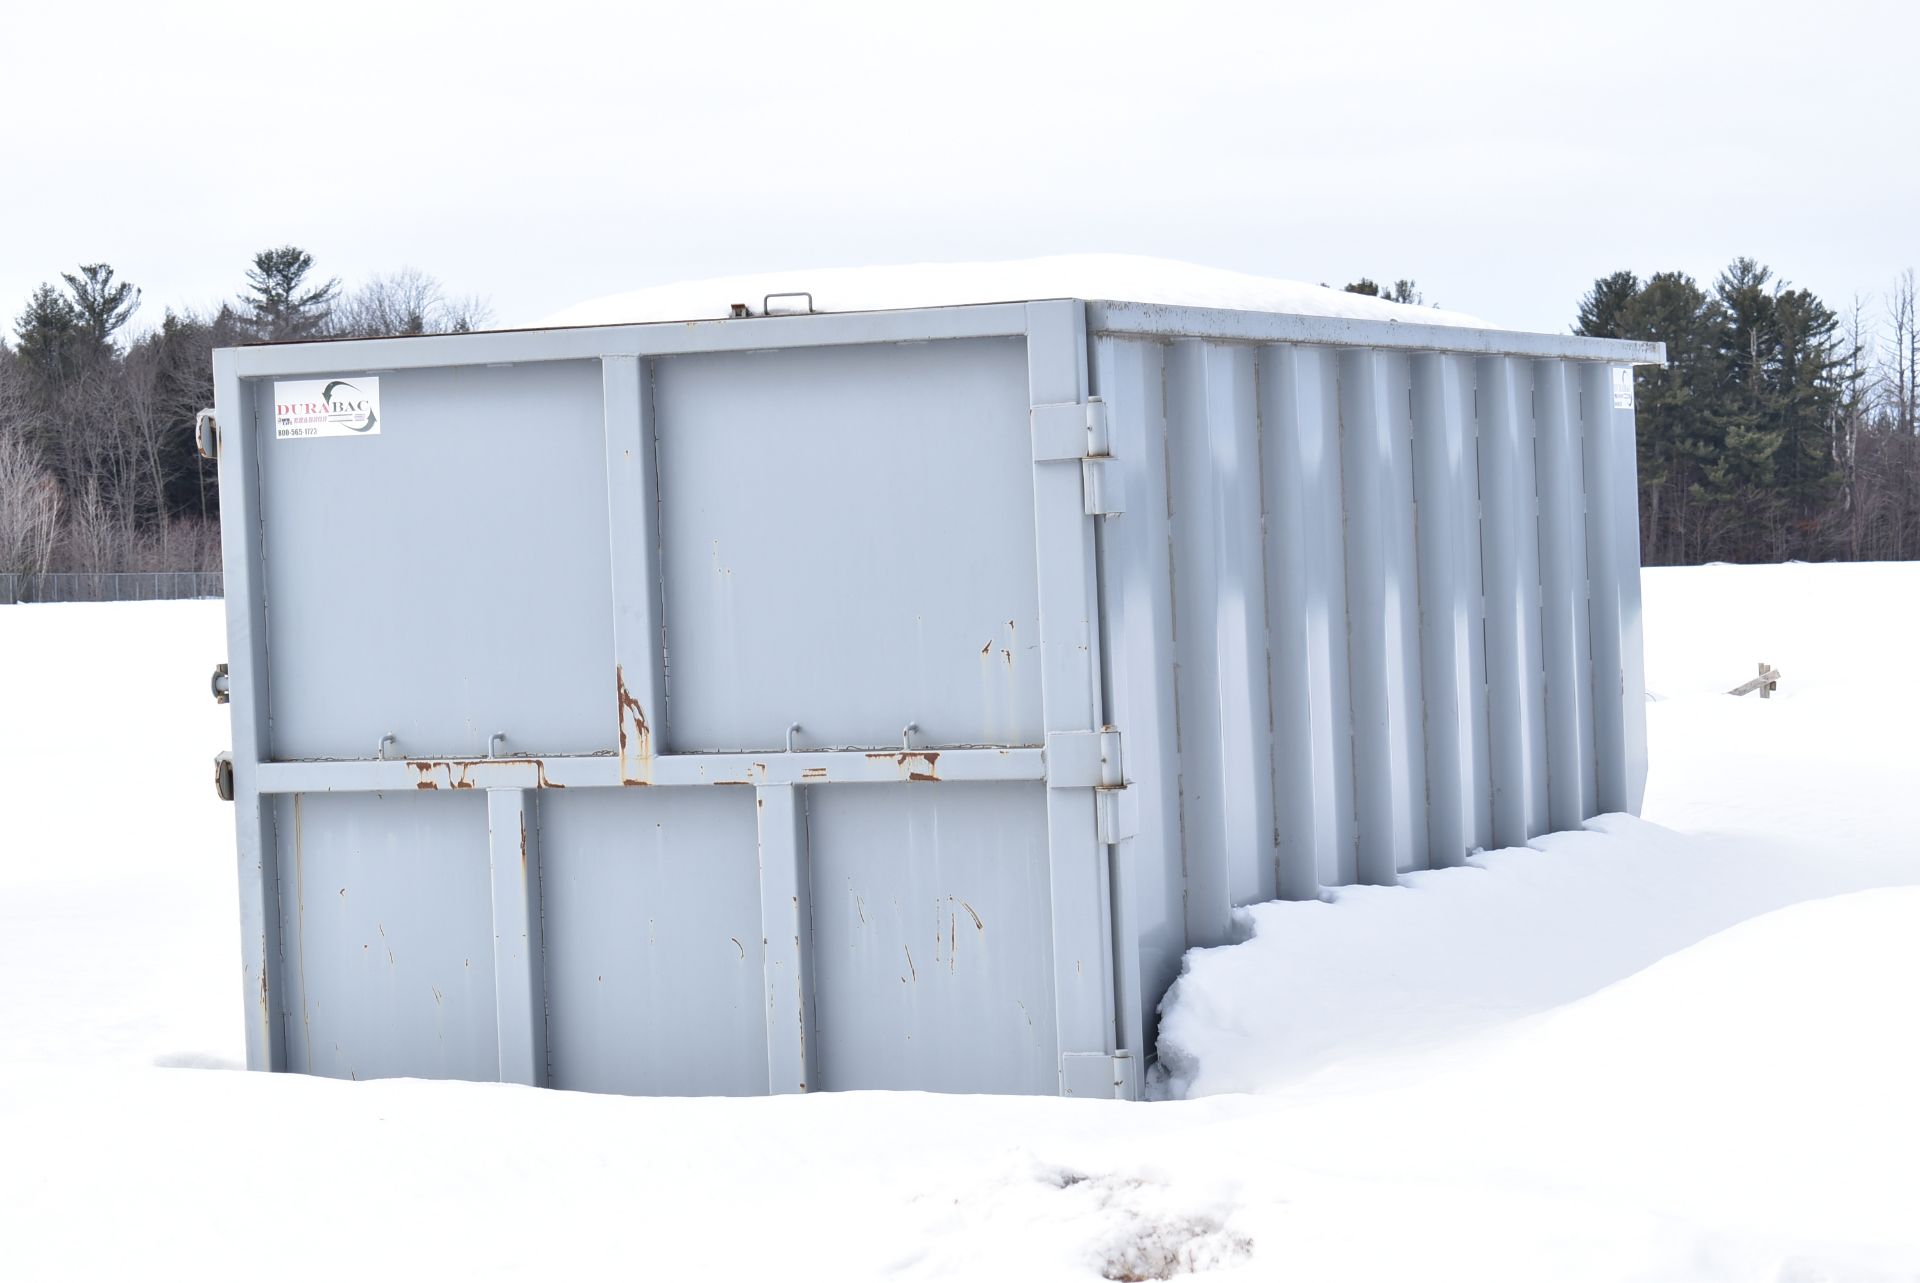 DURBAC 40 YD ROLL-OFF BIN [RIGGING FEE FOR LOT #80A - $250 CAD PLUS APPLICABLE TAXES] - Image 2 of 2